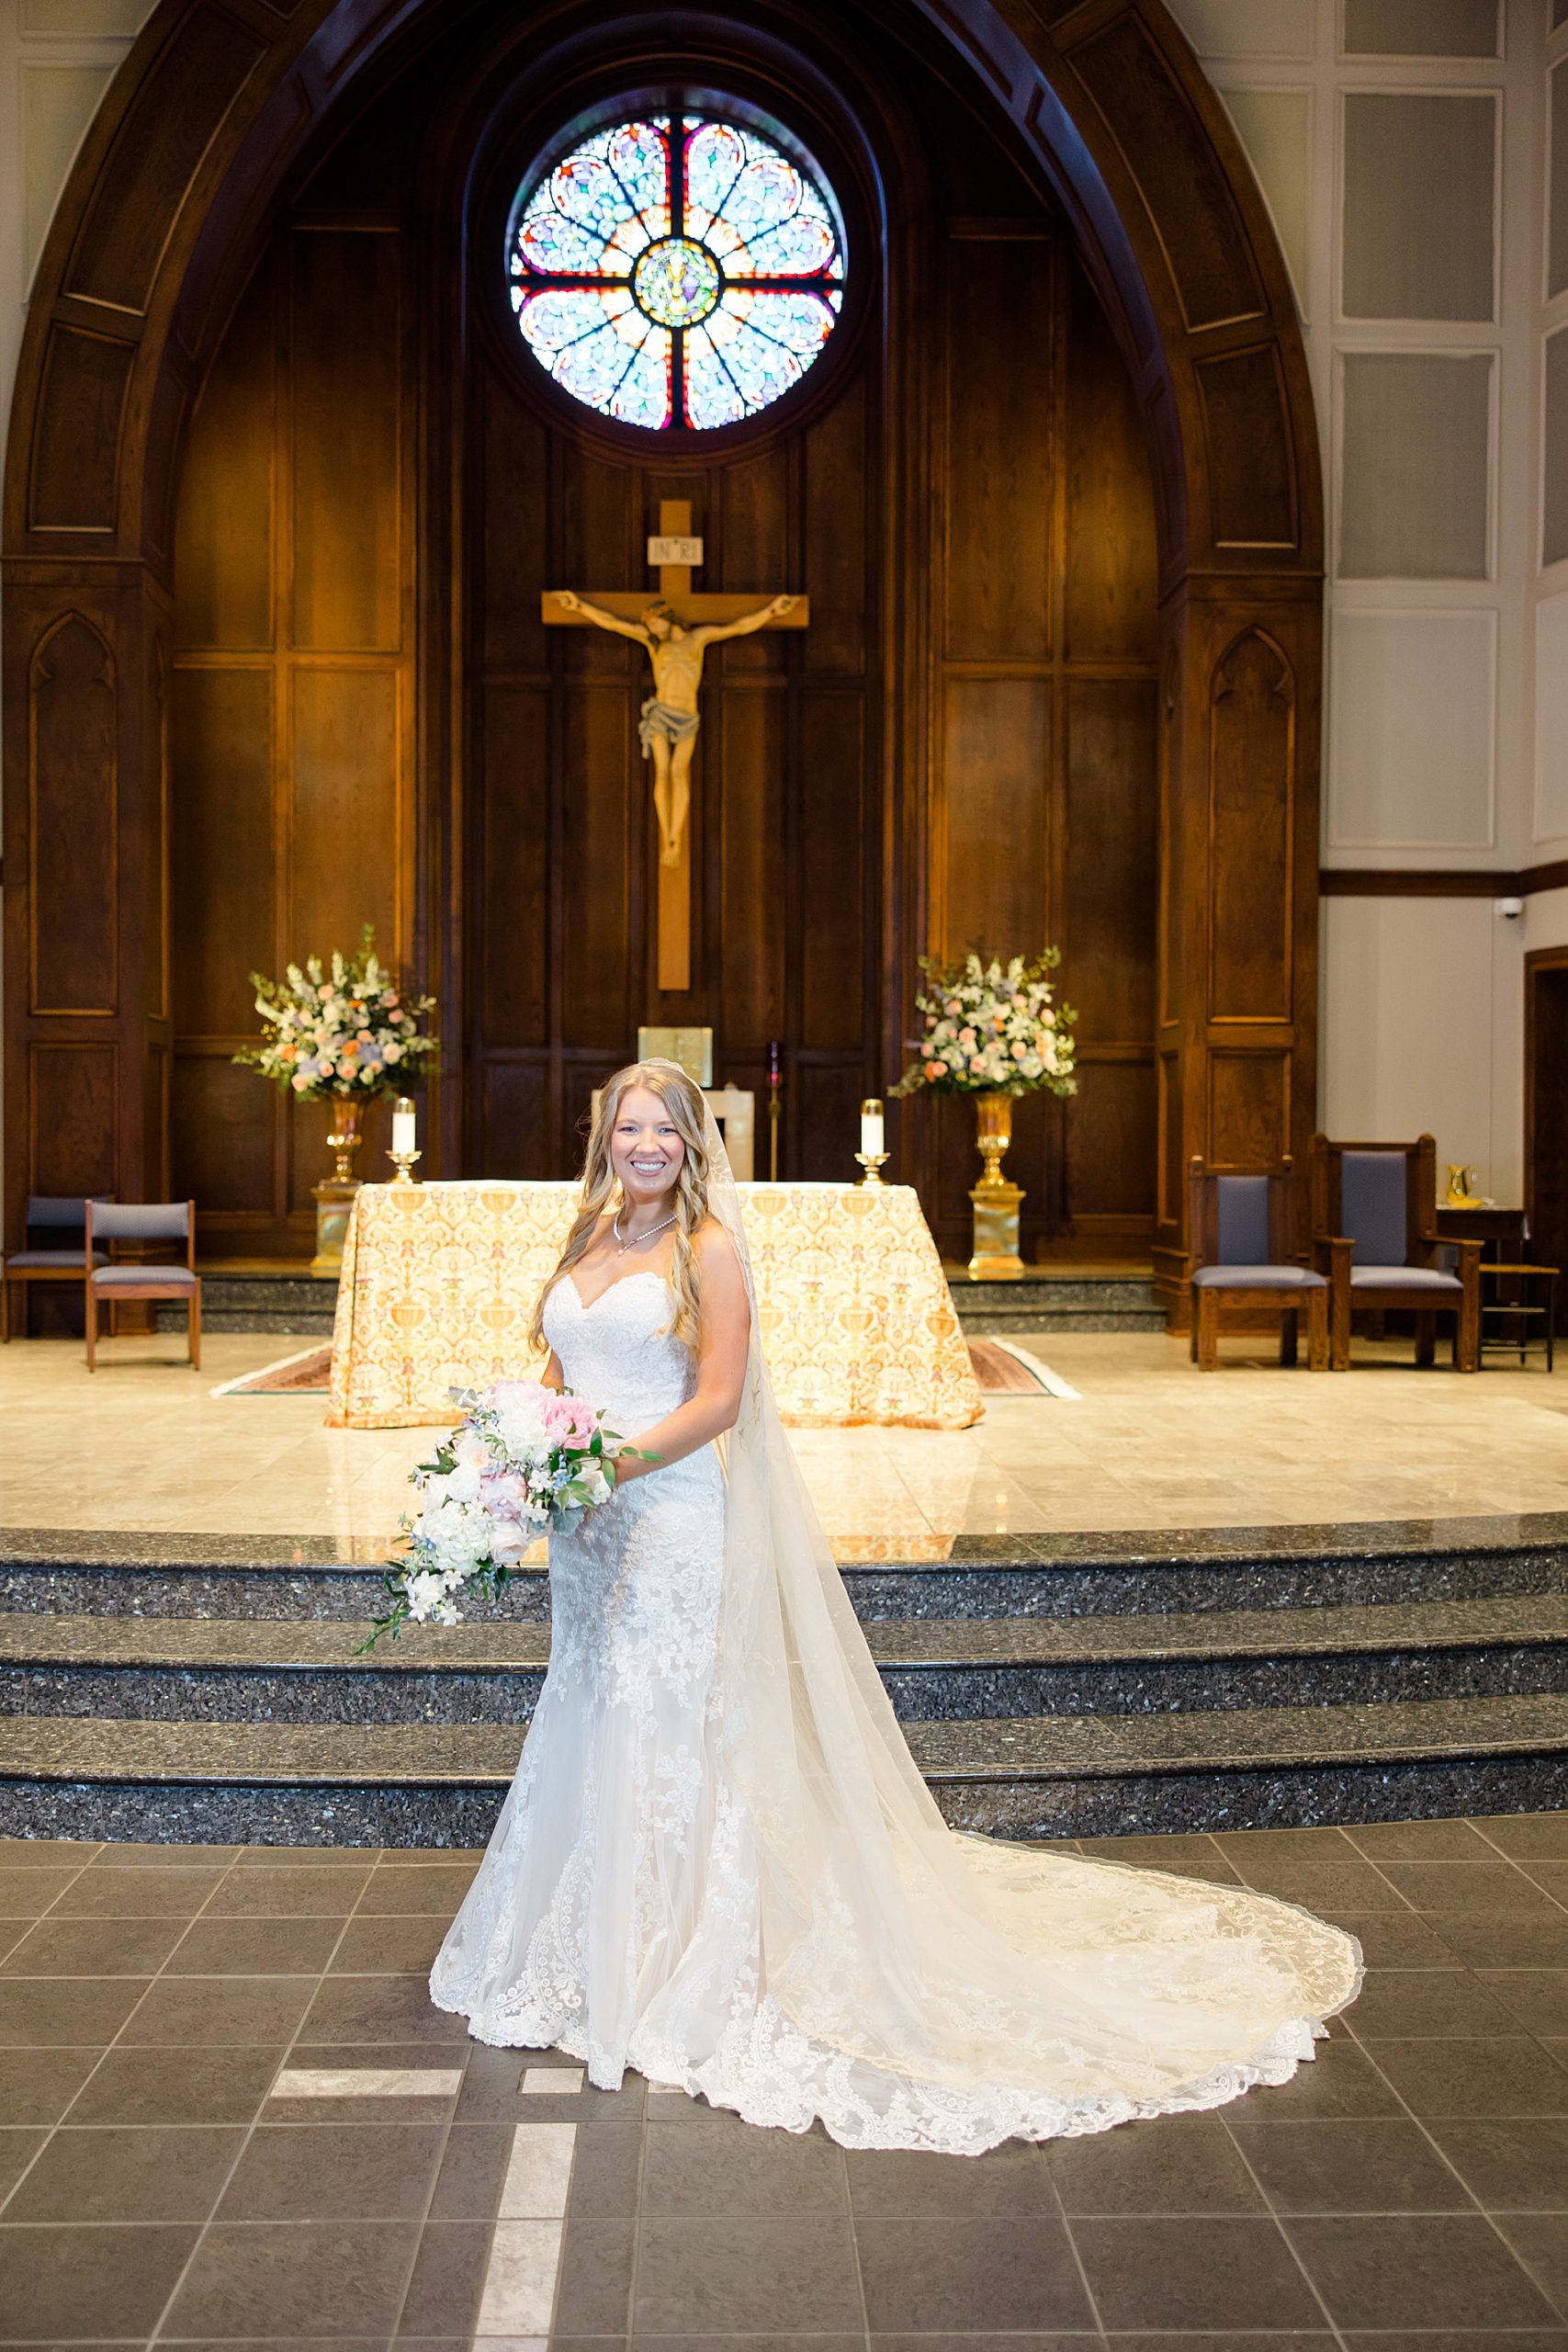 bride at front of church before wedding